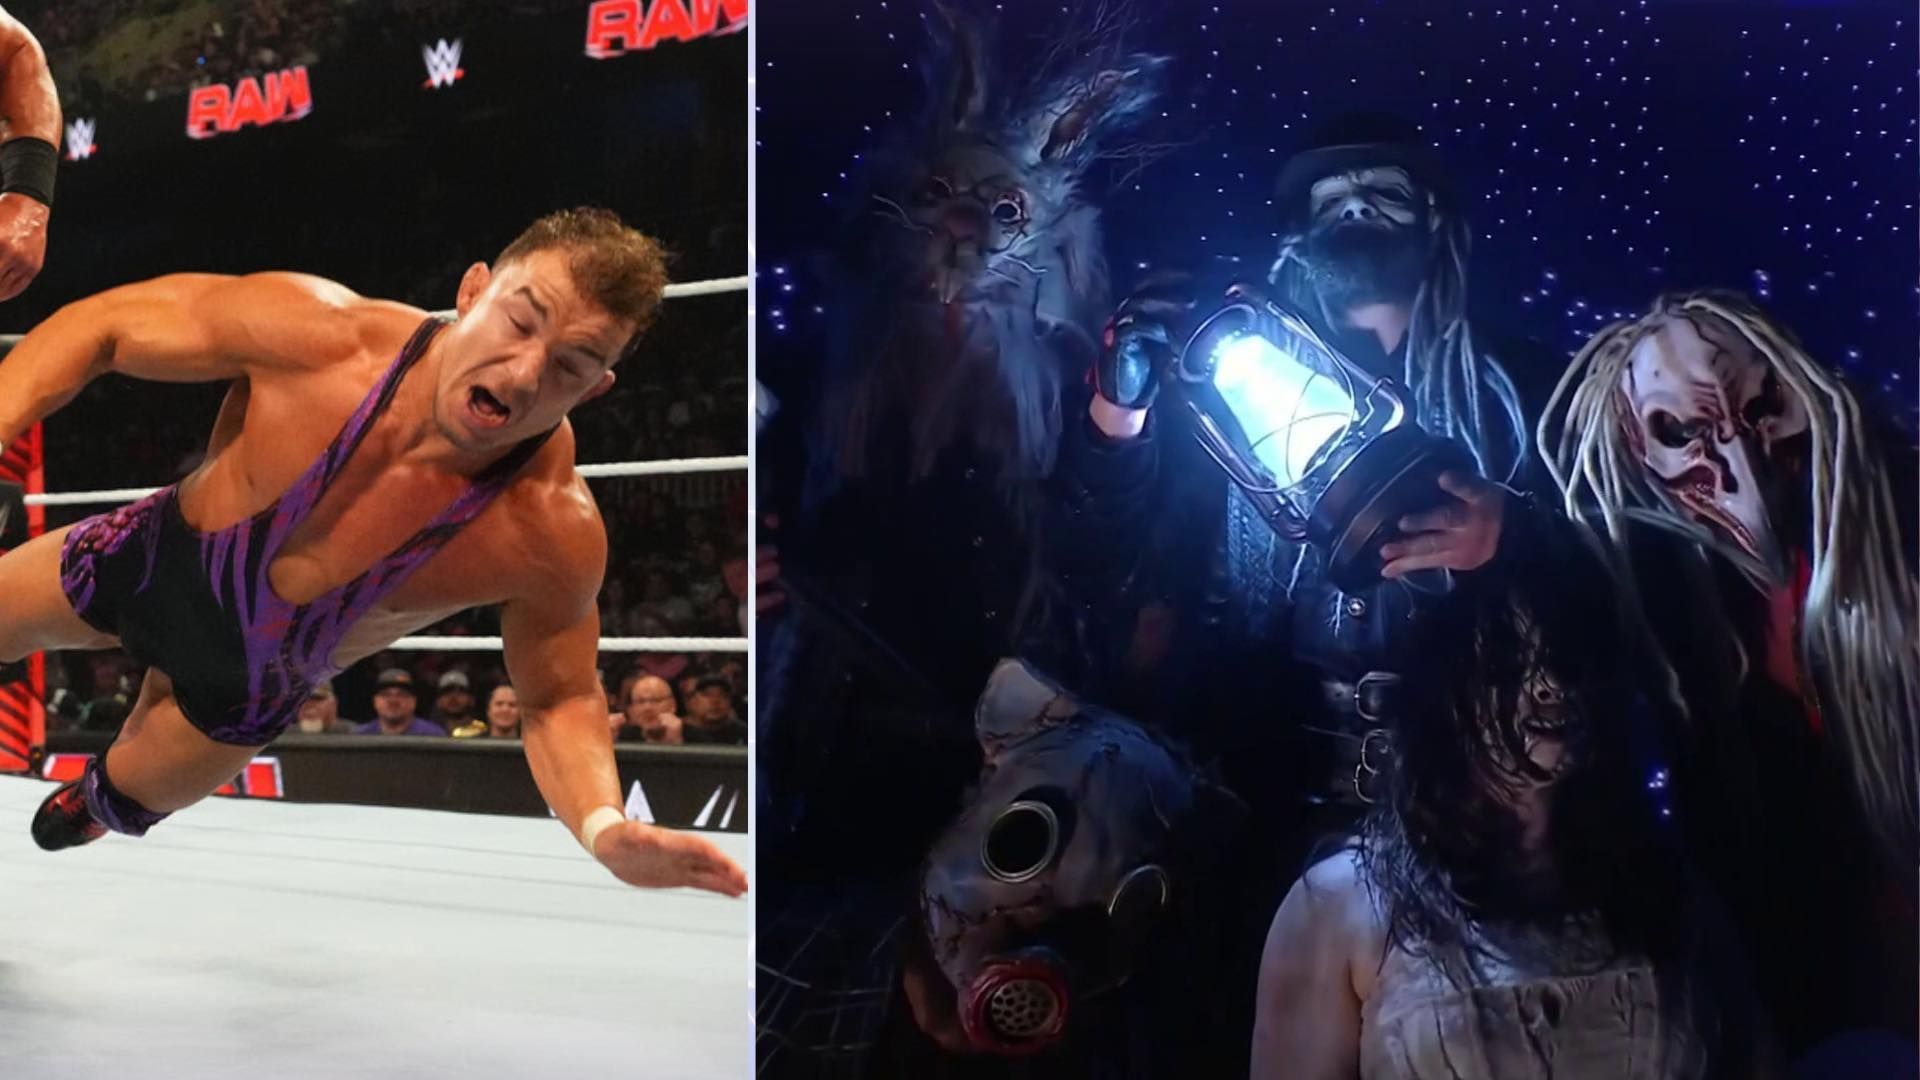 Chad Gable was physically assaulted by The Wyatt Sicks on WWE Monday Night RAW